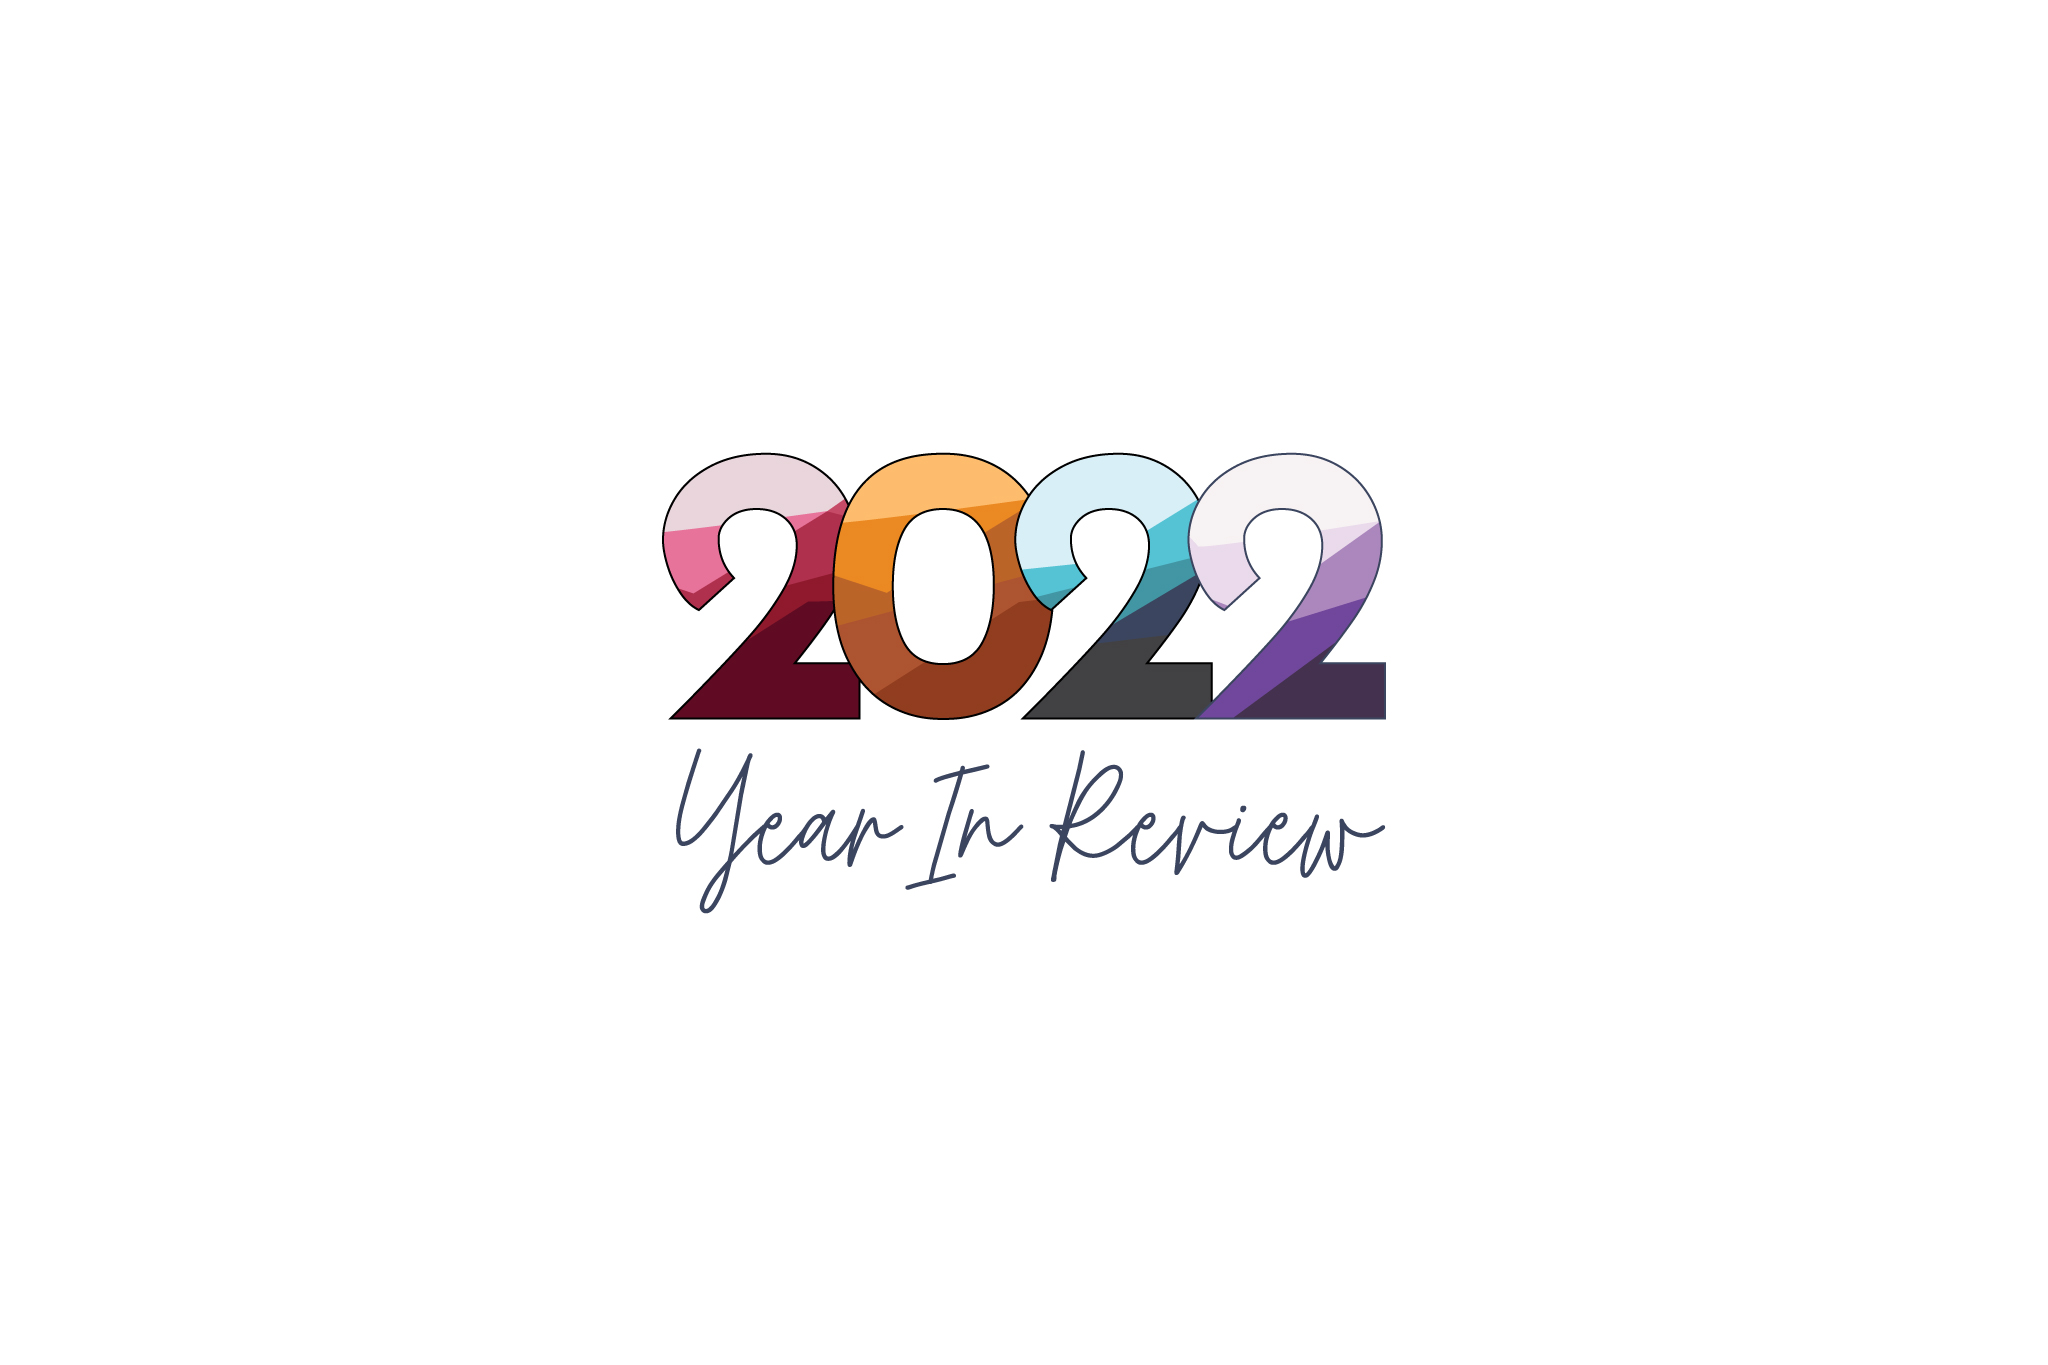 Strata Wealth Year in Review 2022